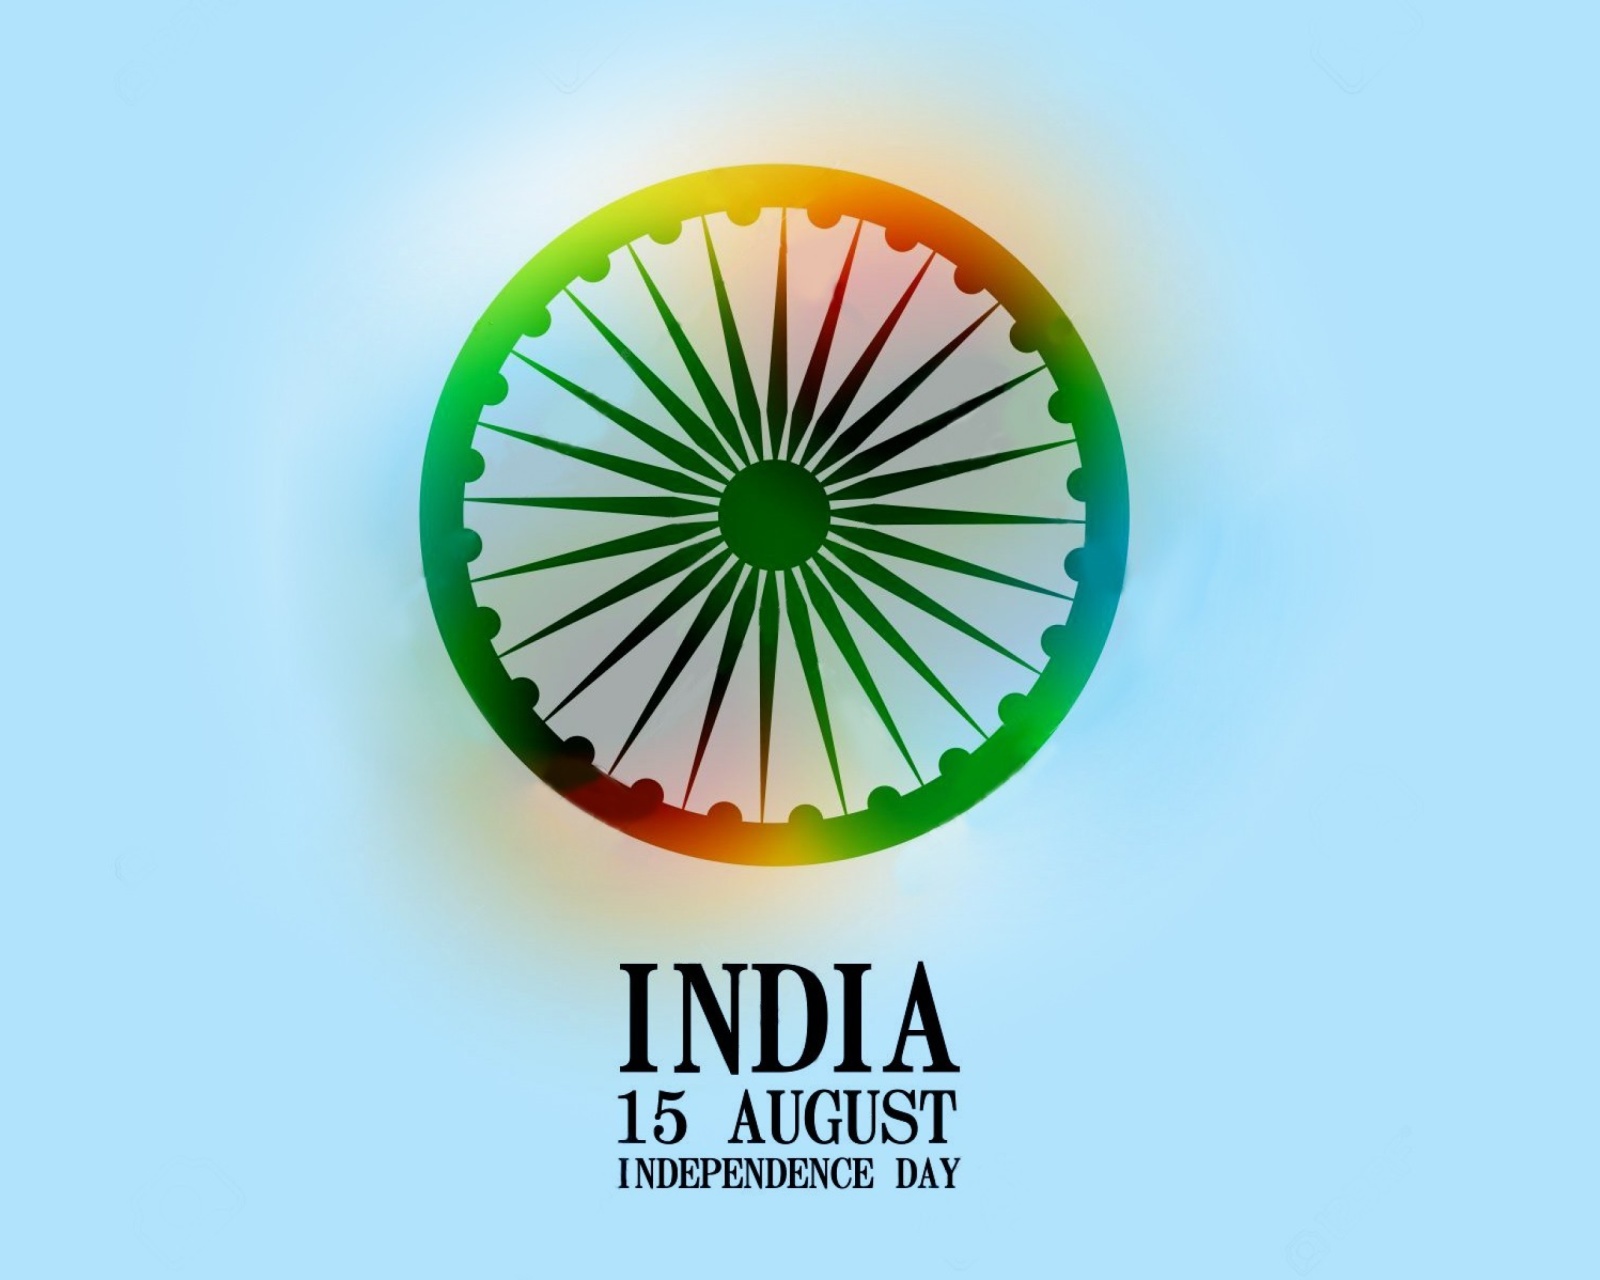 India Independence Day 15 August wallpaper 1600x1280